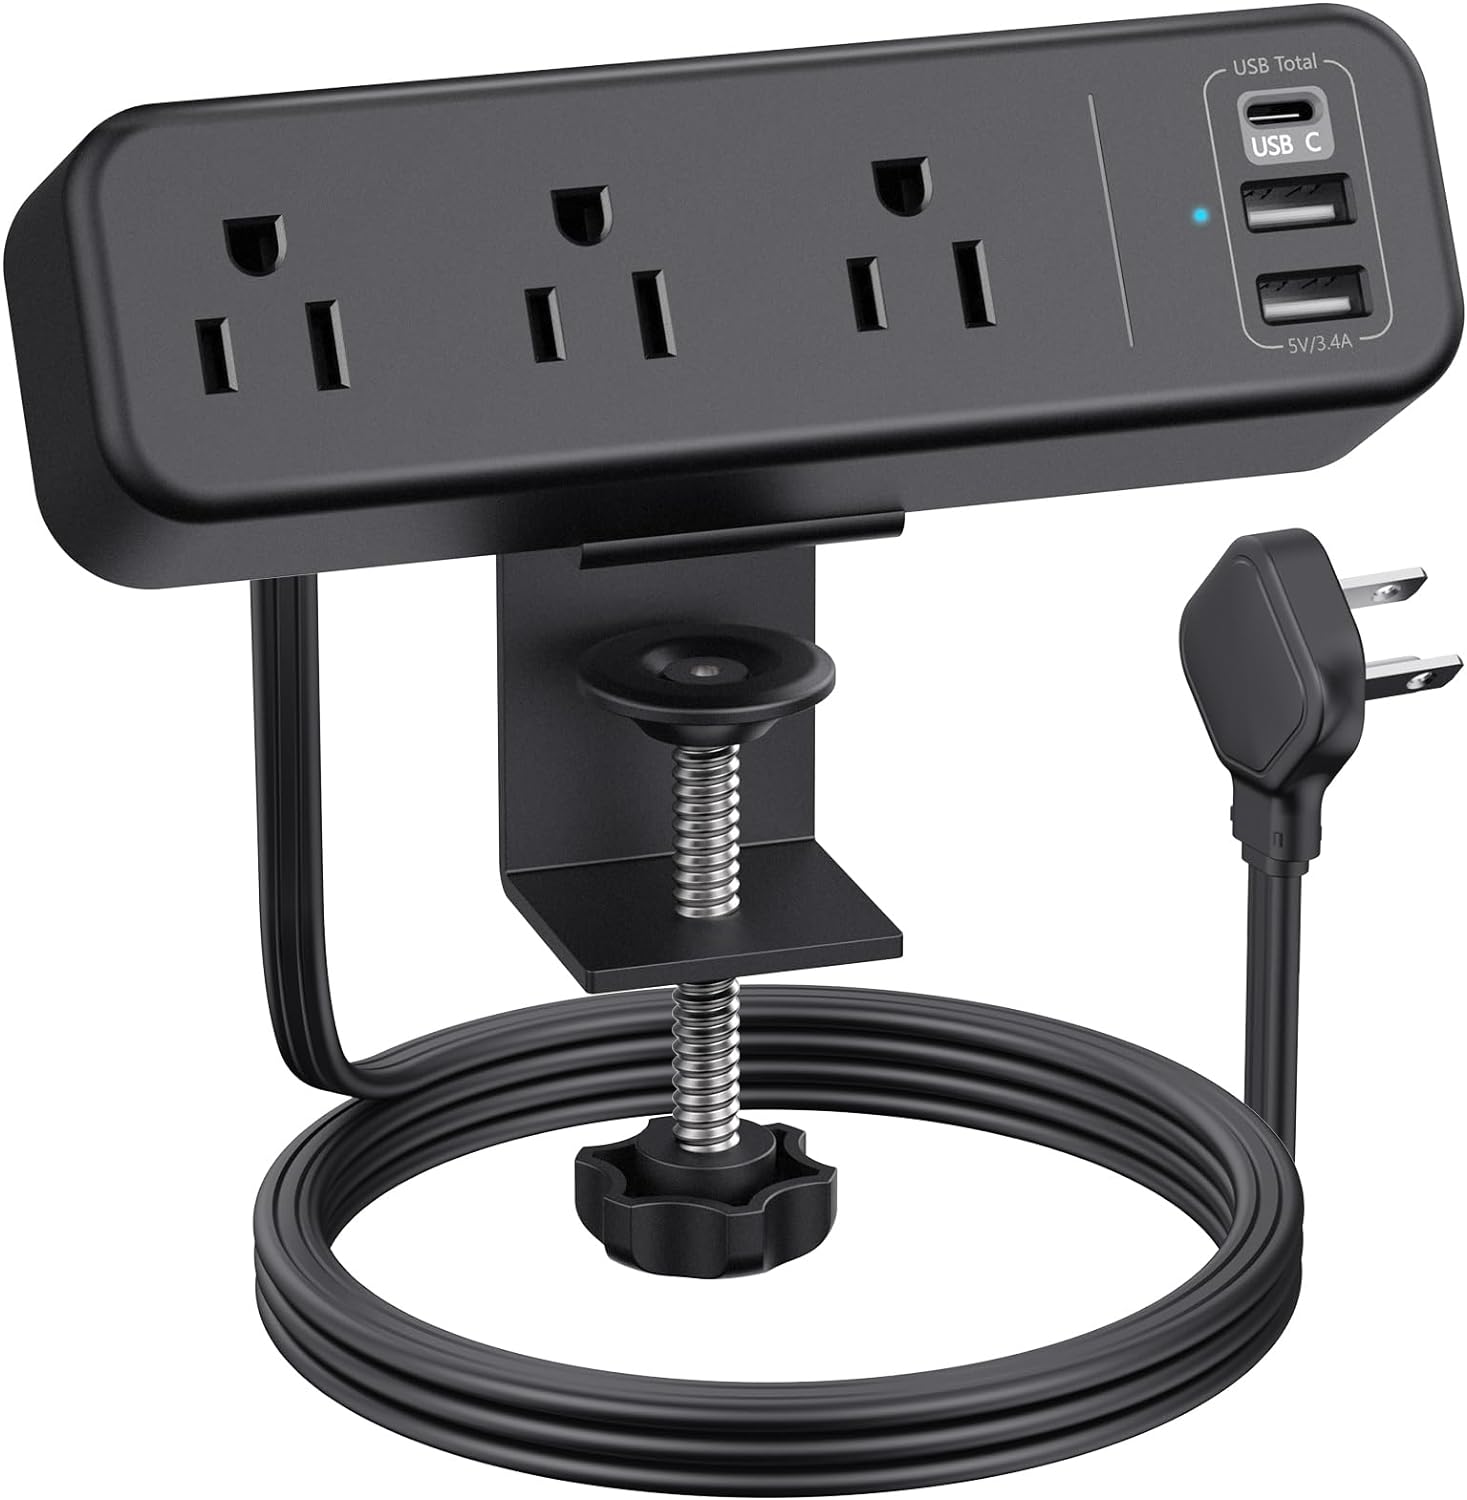 3 Outlet Desk Clamp Power Strip with USB C, Black Flat Plug Desktop Edge Clamp Power Socket Connect 6.5 ft Thin Extension Cord for 1.6 inch Tables